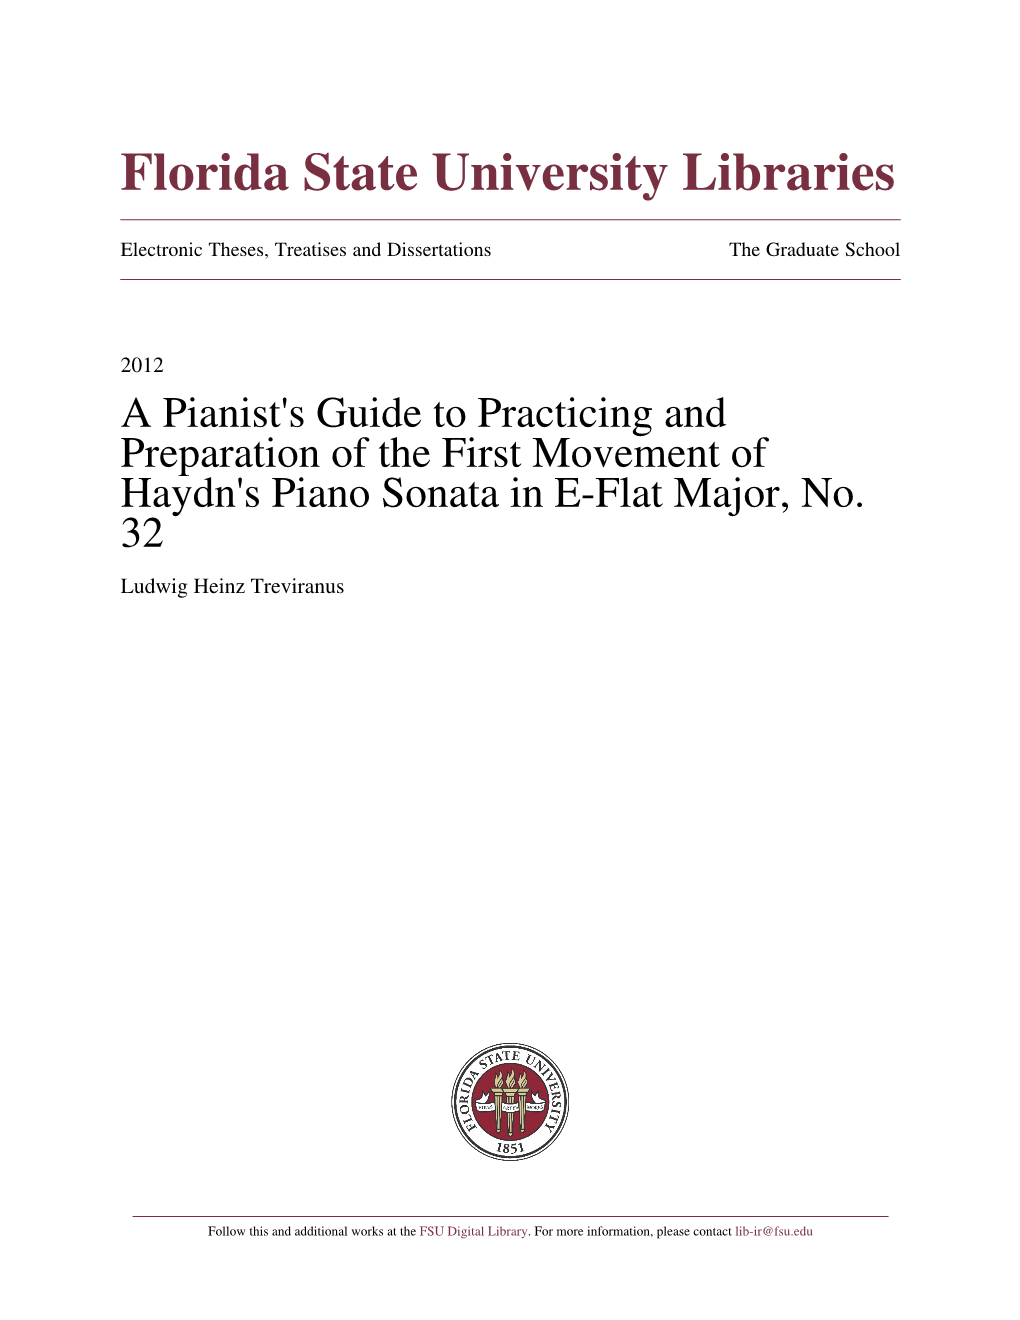 A Pianist's Guide to Practicing and Preparation of the First Movement of Haydn's Piano Sonata in E-Flat Major, No